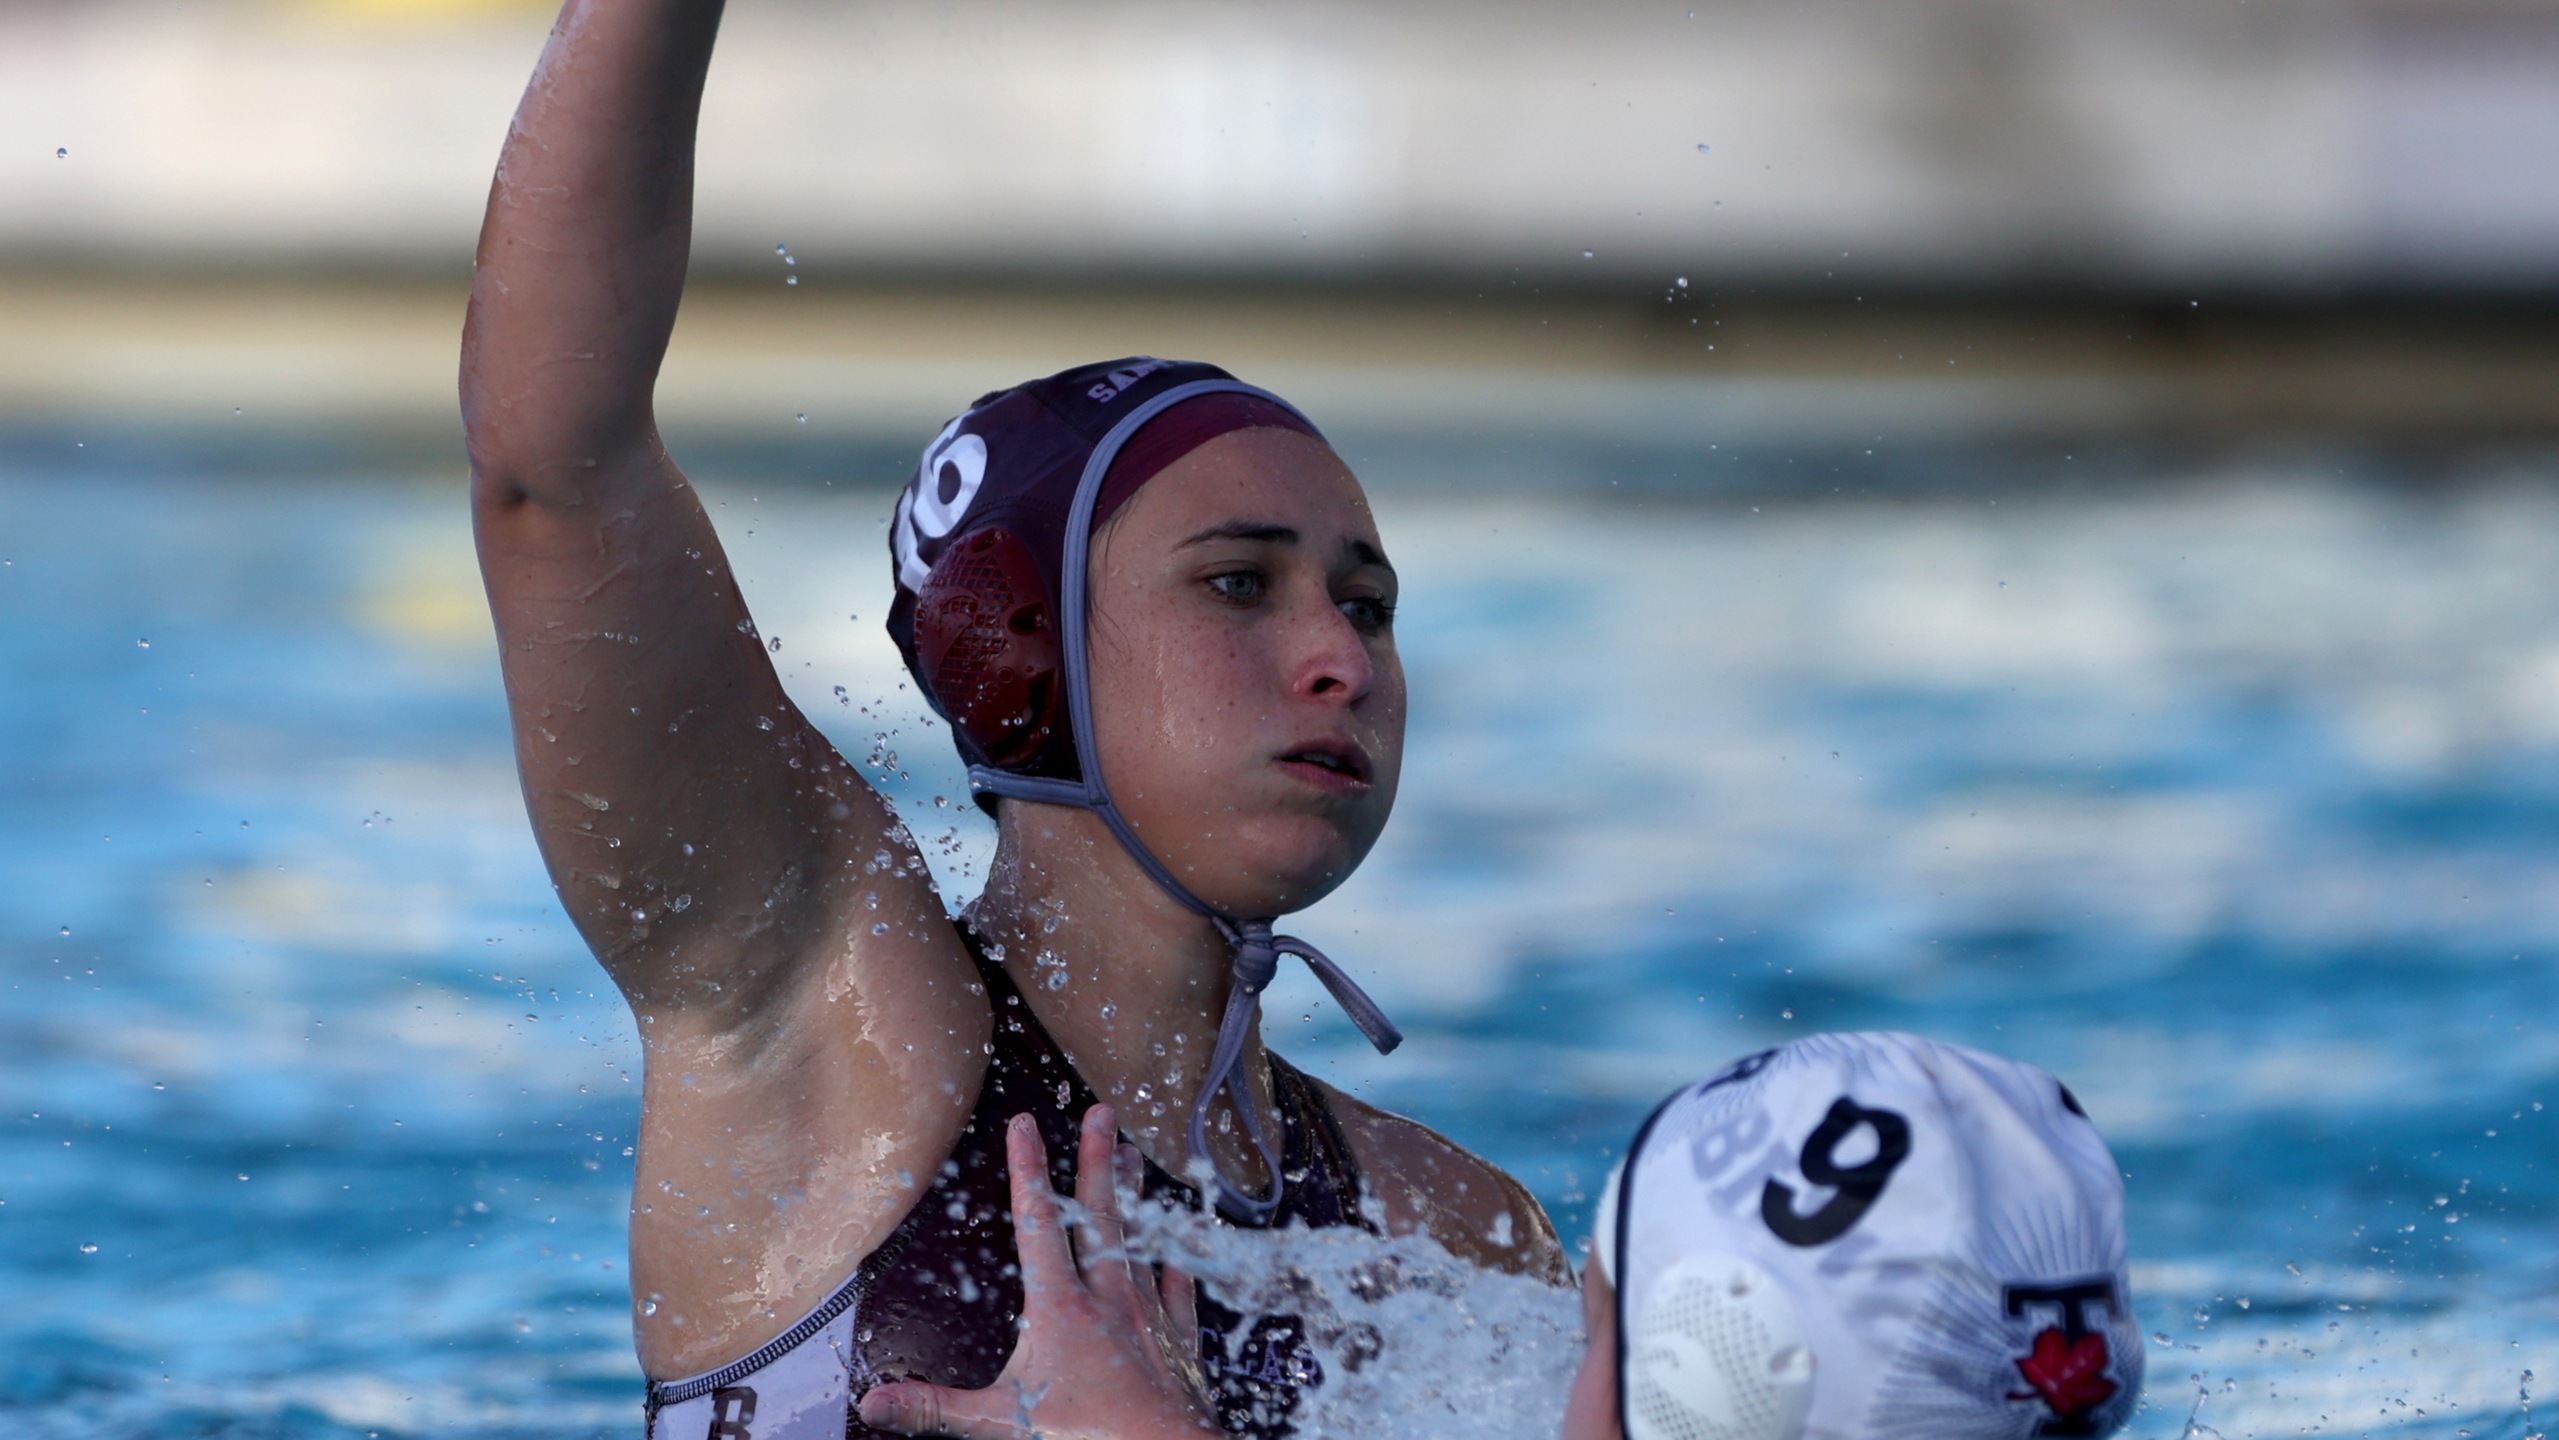 Fredrickson's Late Heroics Carry Women's Water Polo to "Golden" Victory over Pioneers